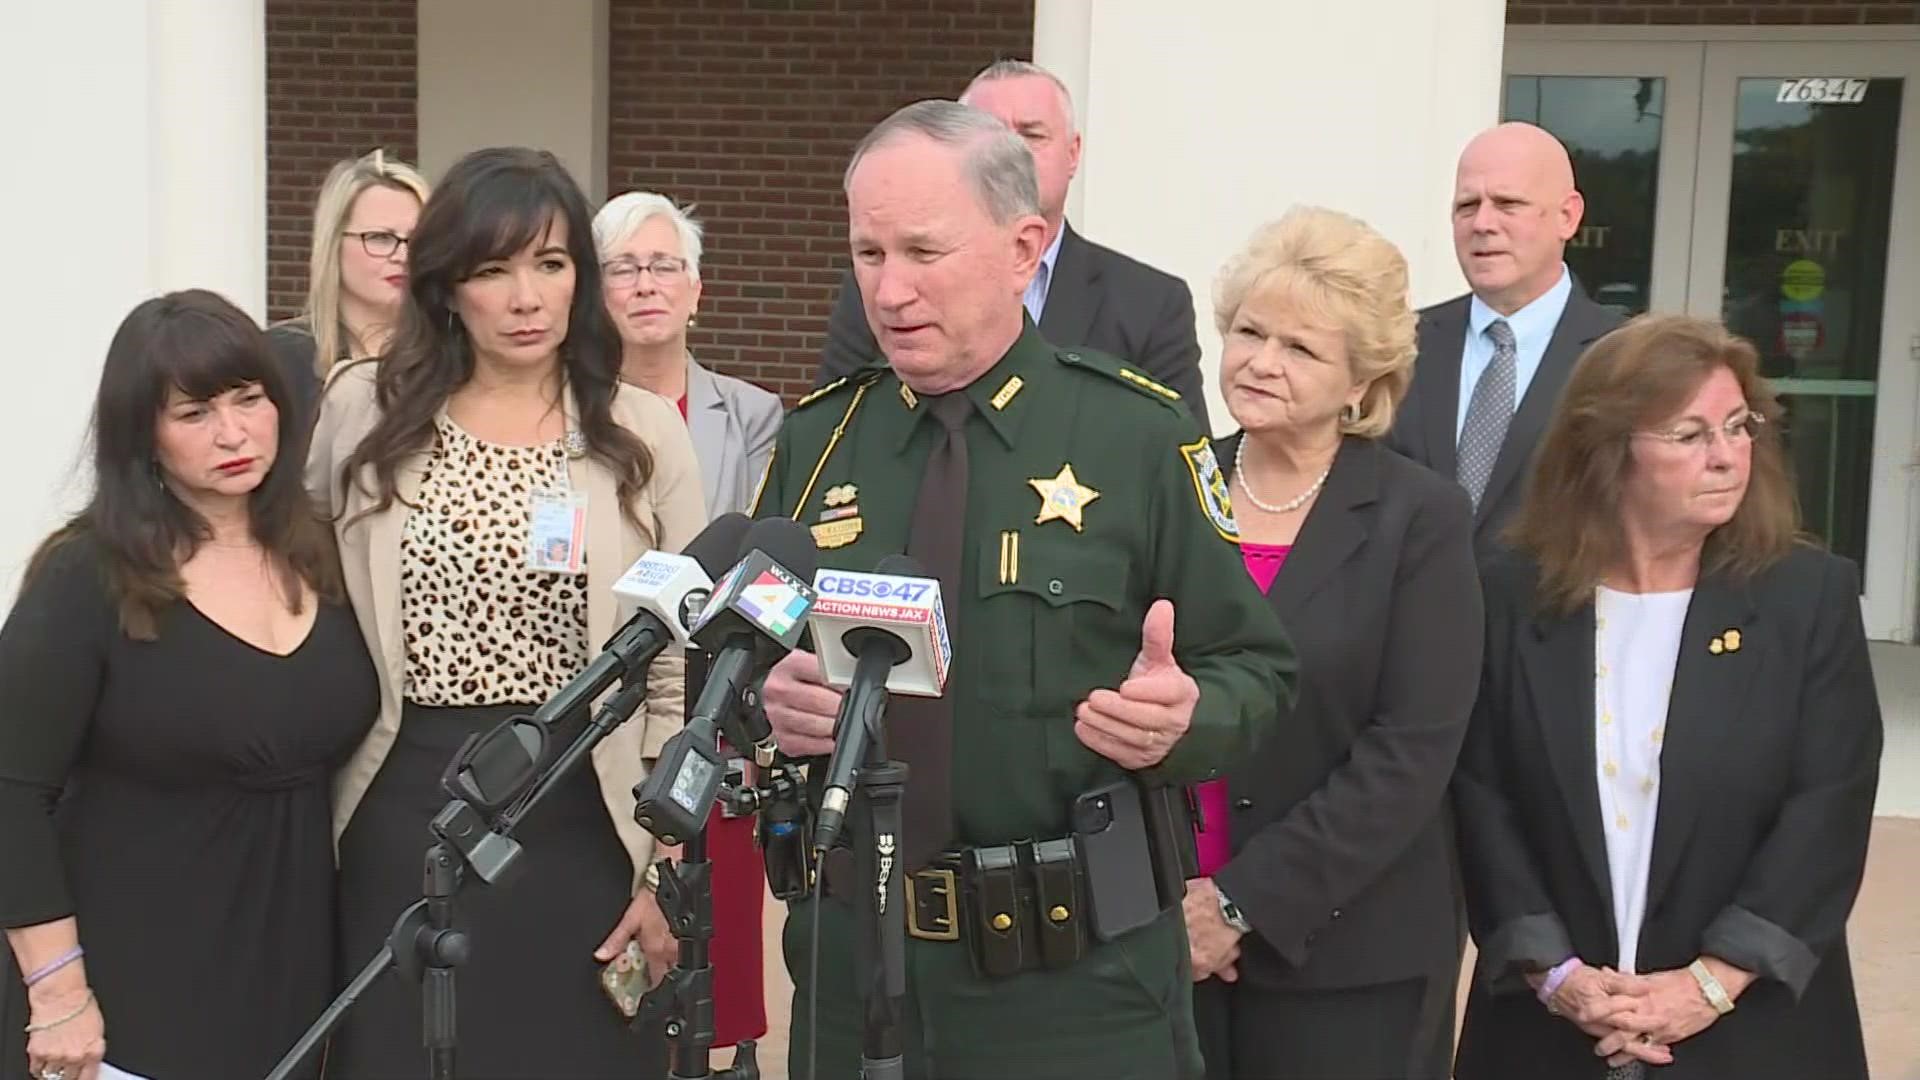 Sheriff Bill Leeper says Kimberly Kessler is the state's problem now.